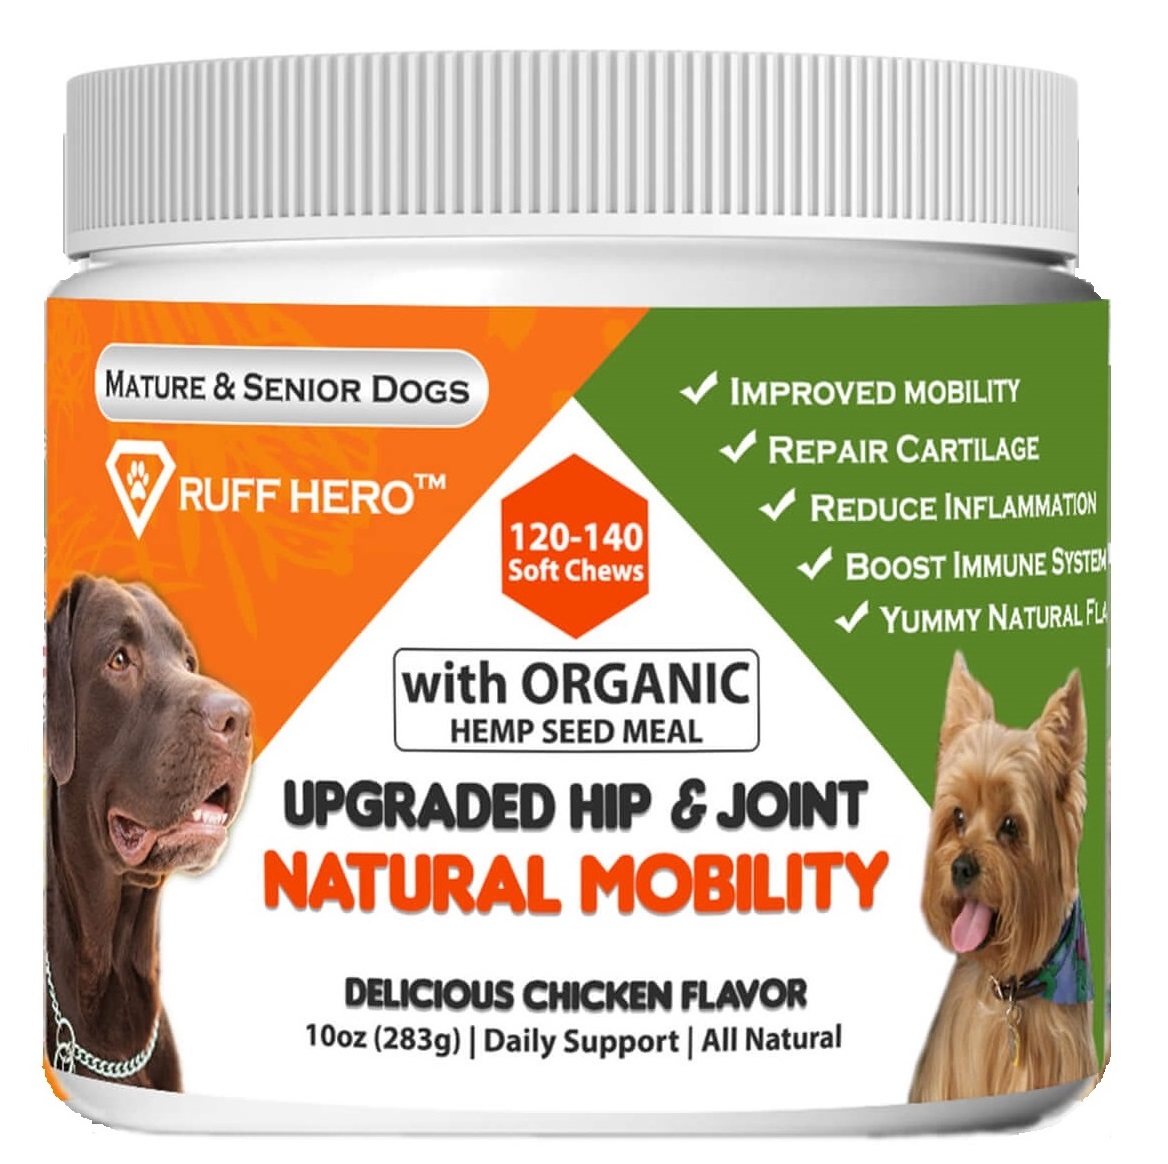 hemp joint supplement for dogs